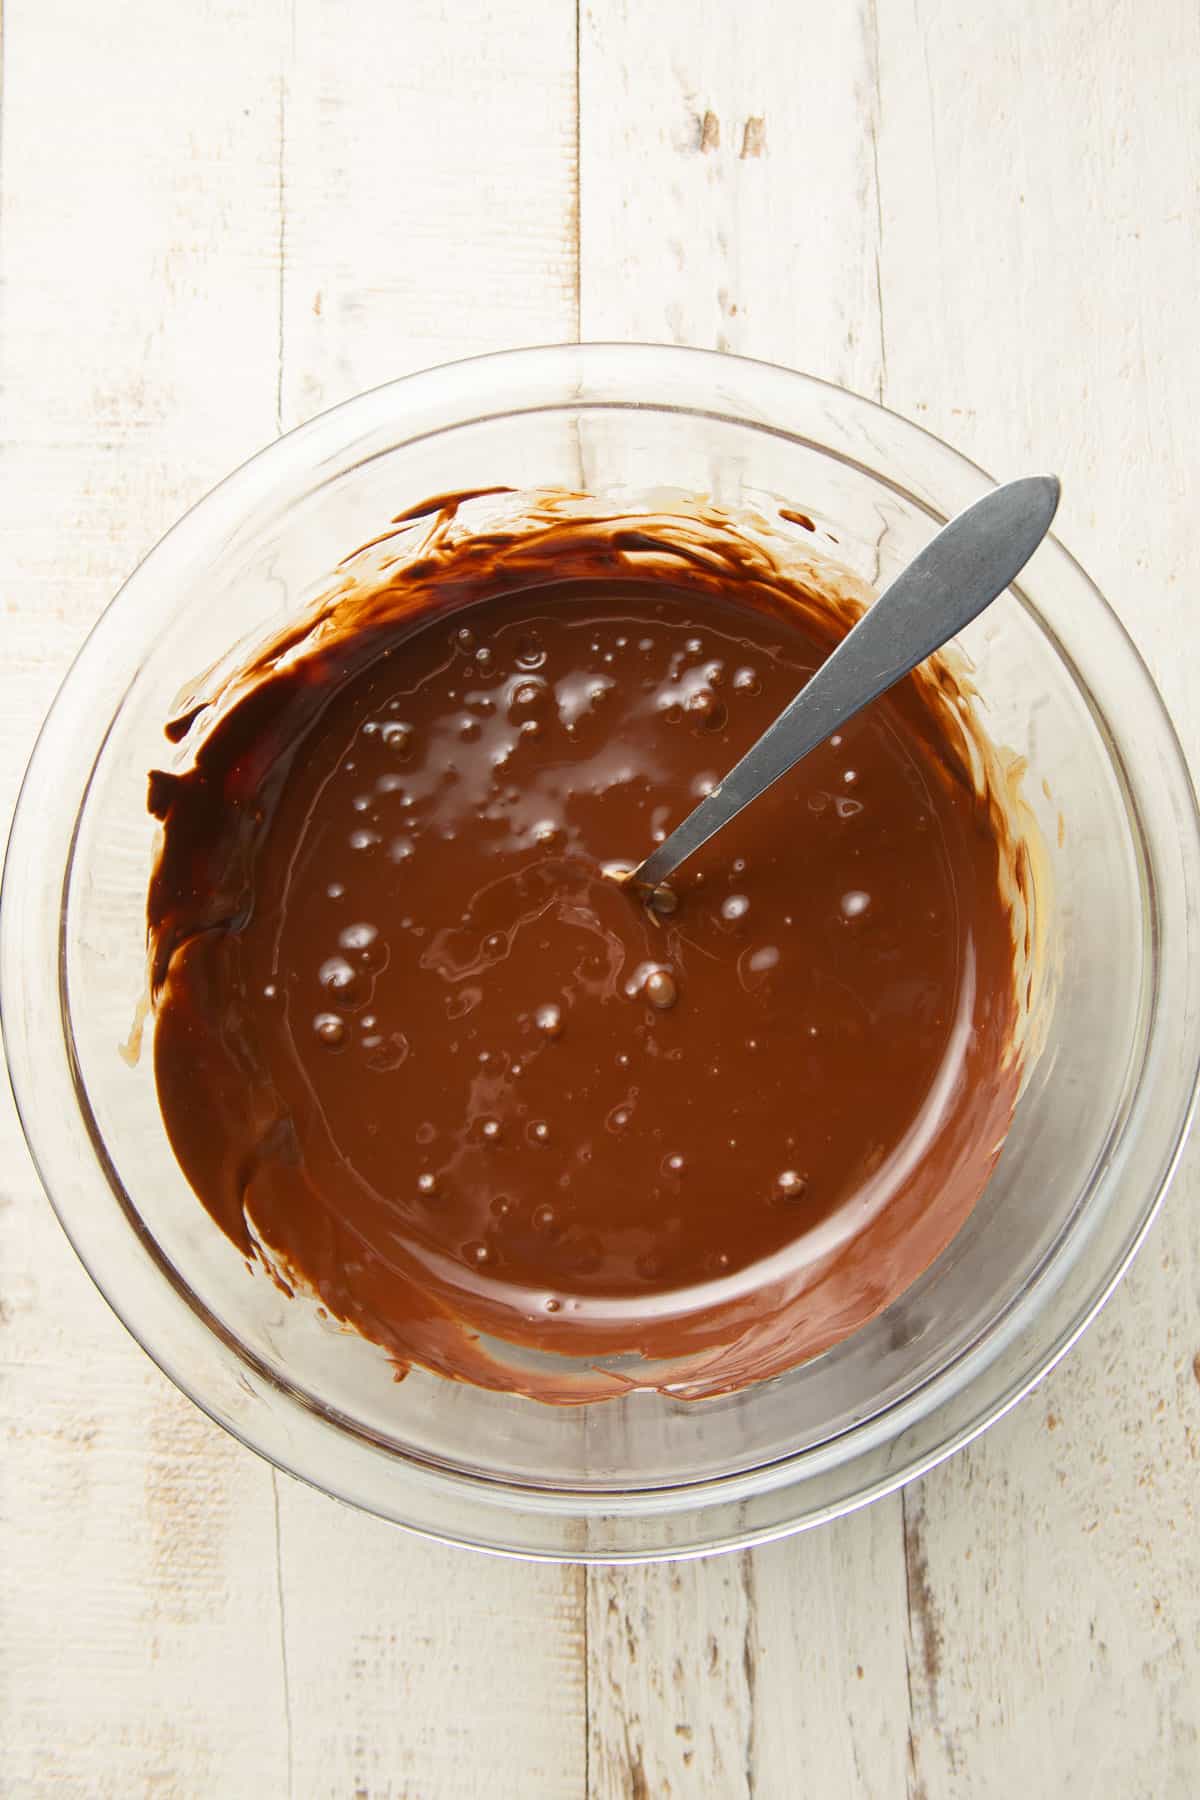 Melted chocolate and peanut butter in a glass bowl with spoon.